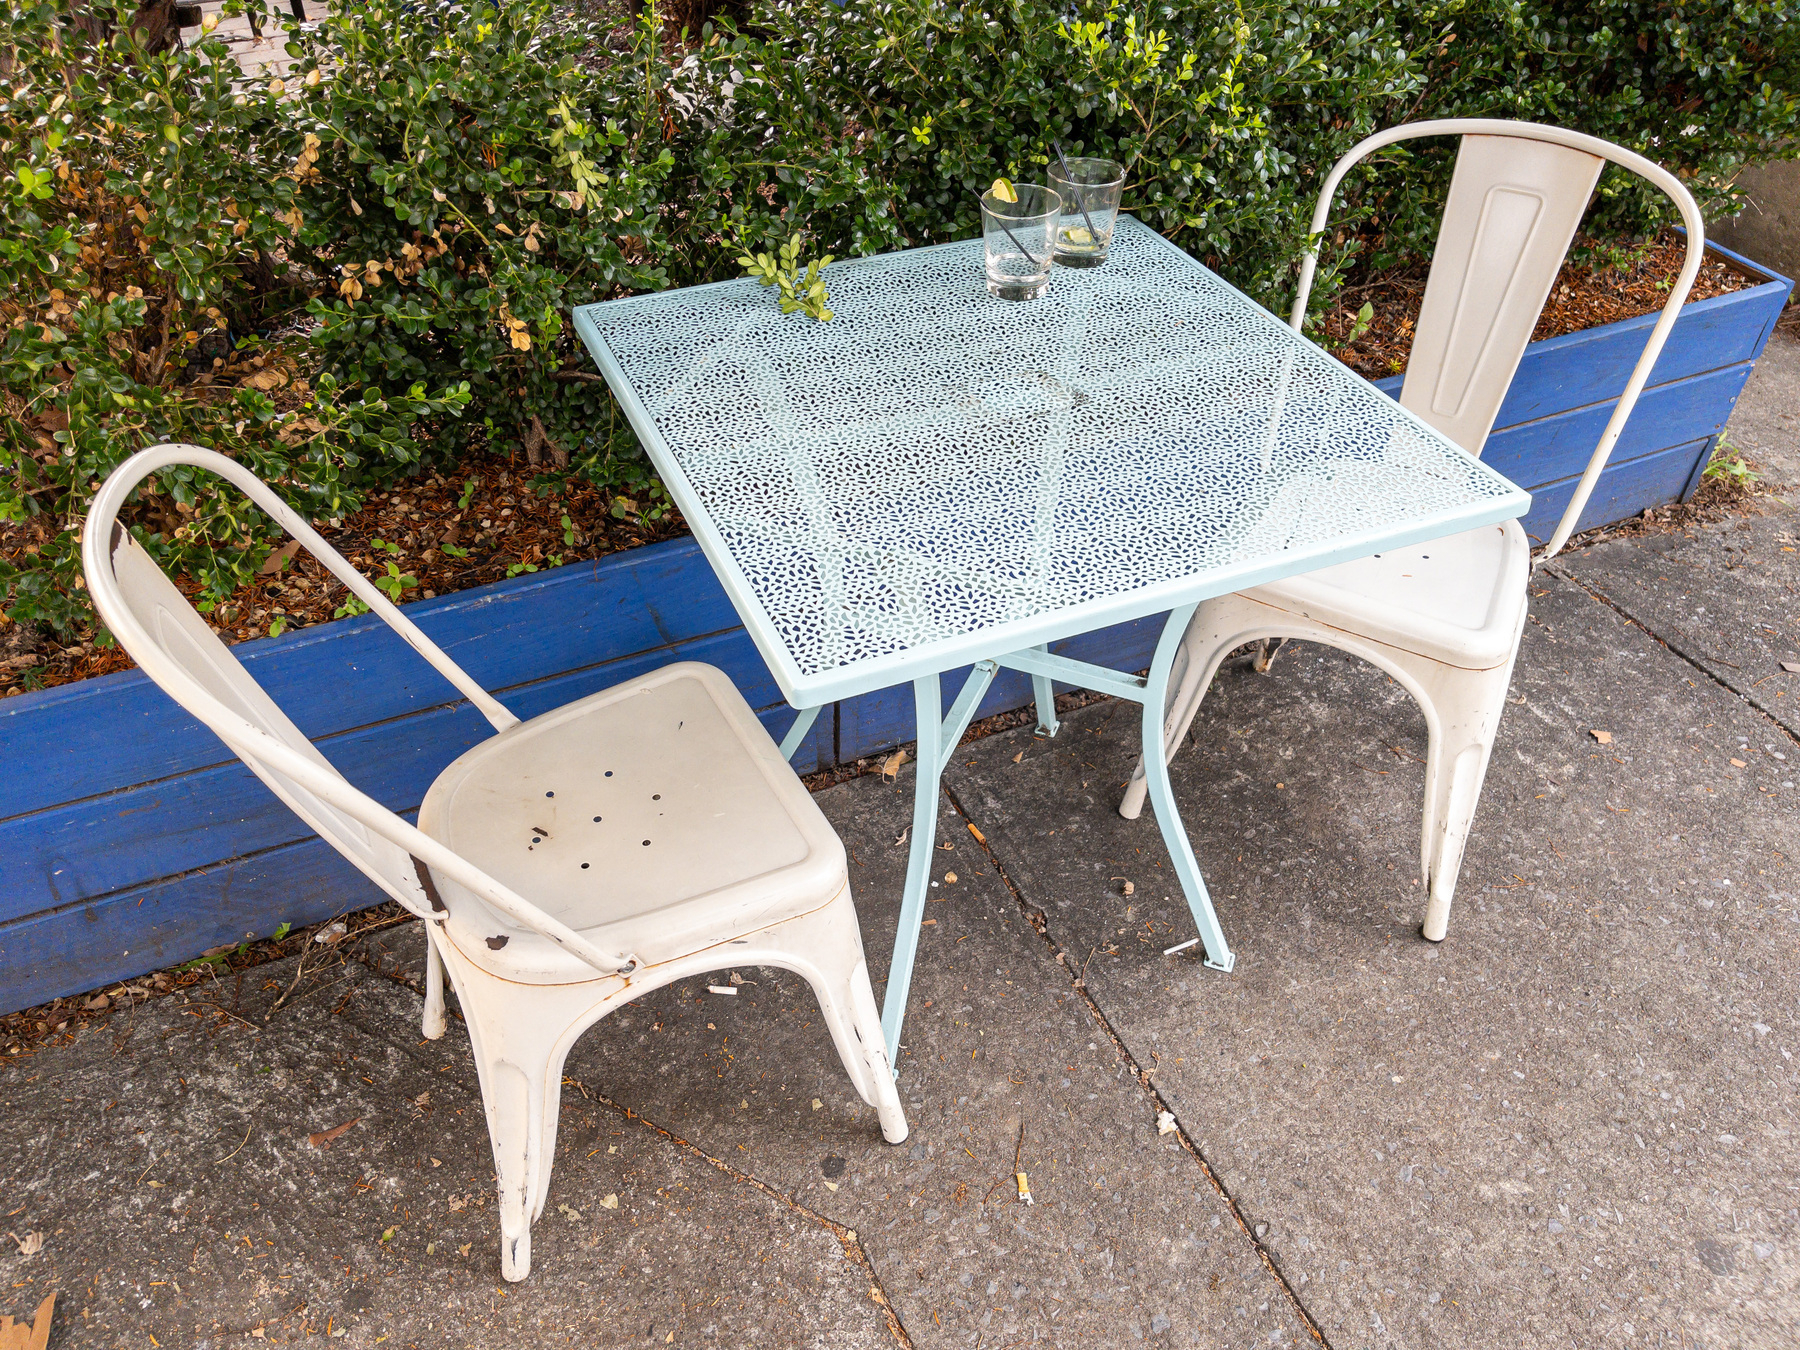 Metal table and chairs outside a drinking establishment with two glasses with partially finished drinks inside.